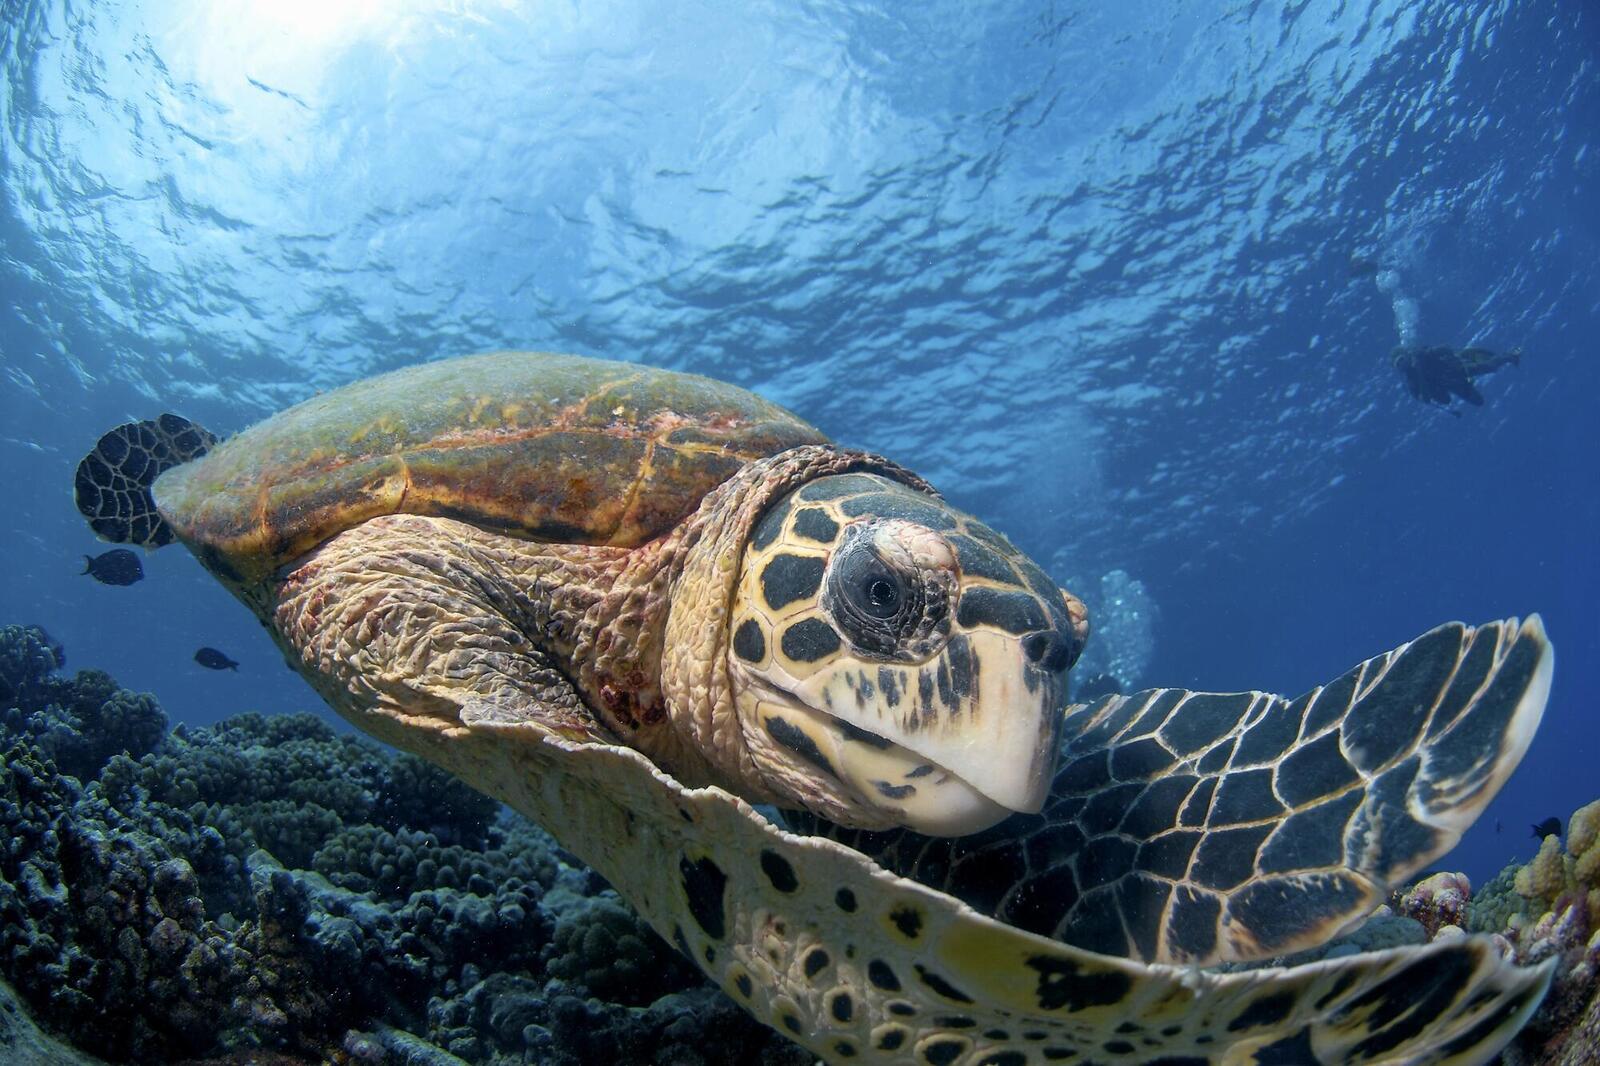 Hawksbill sea turtle looking at the camera